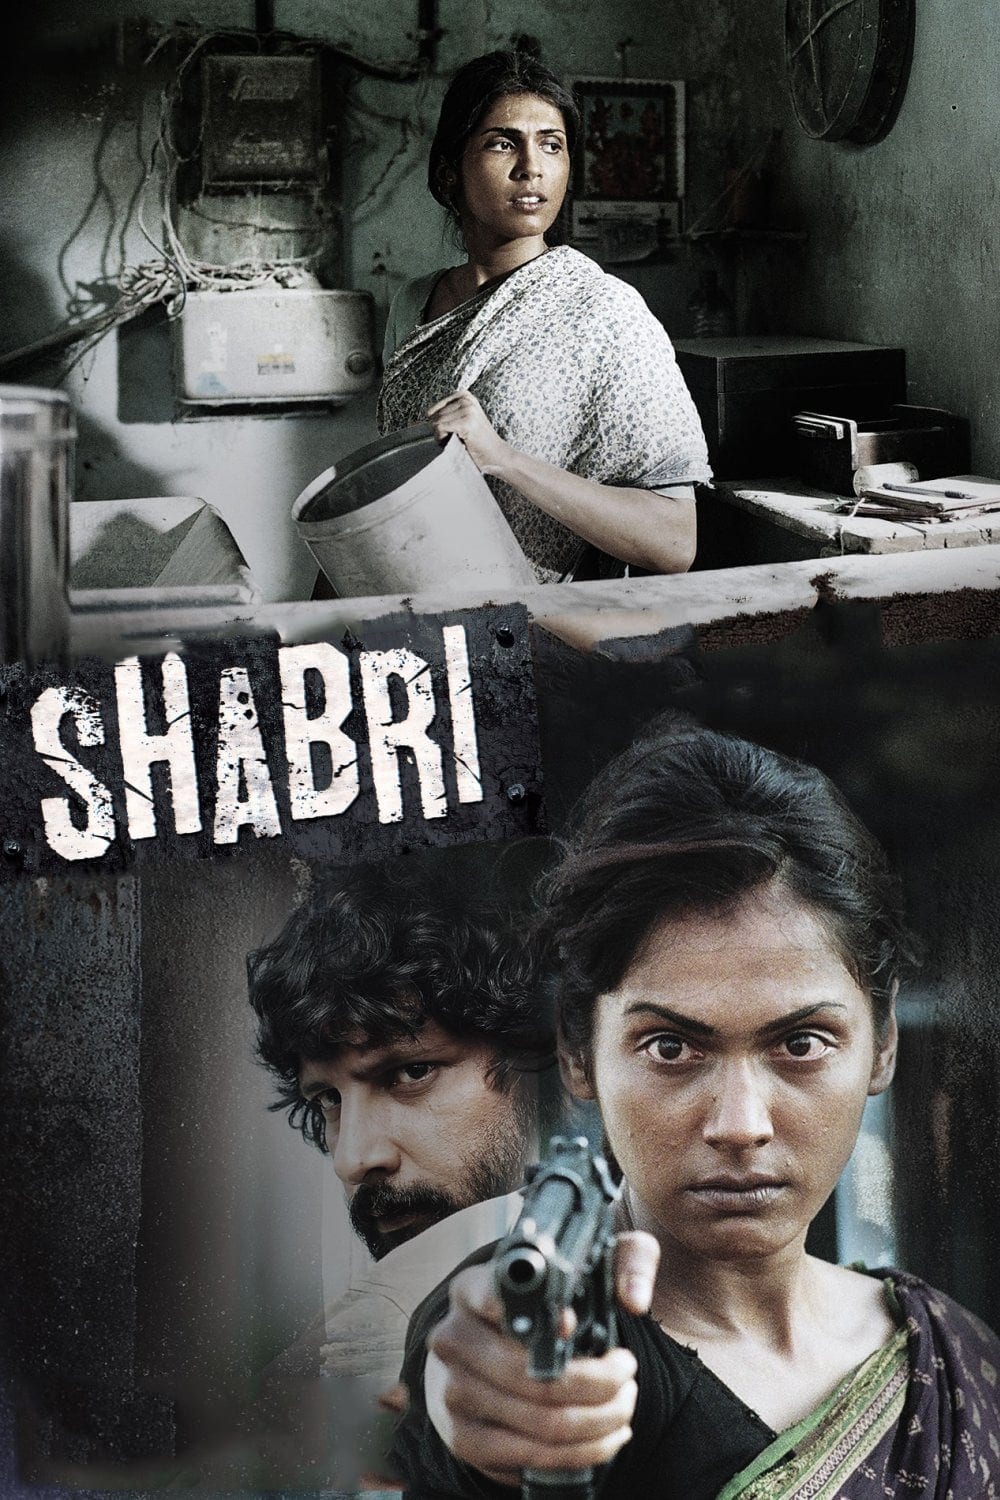 Poster for the movie "Shabri"